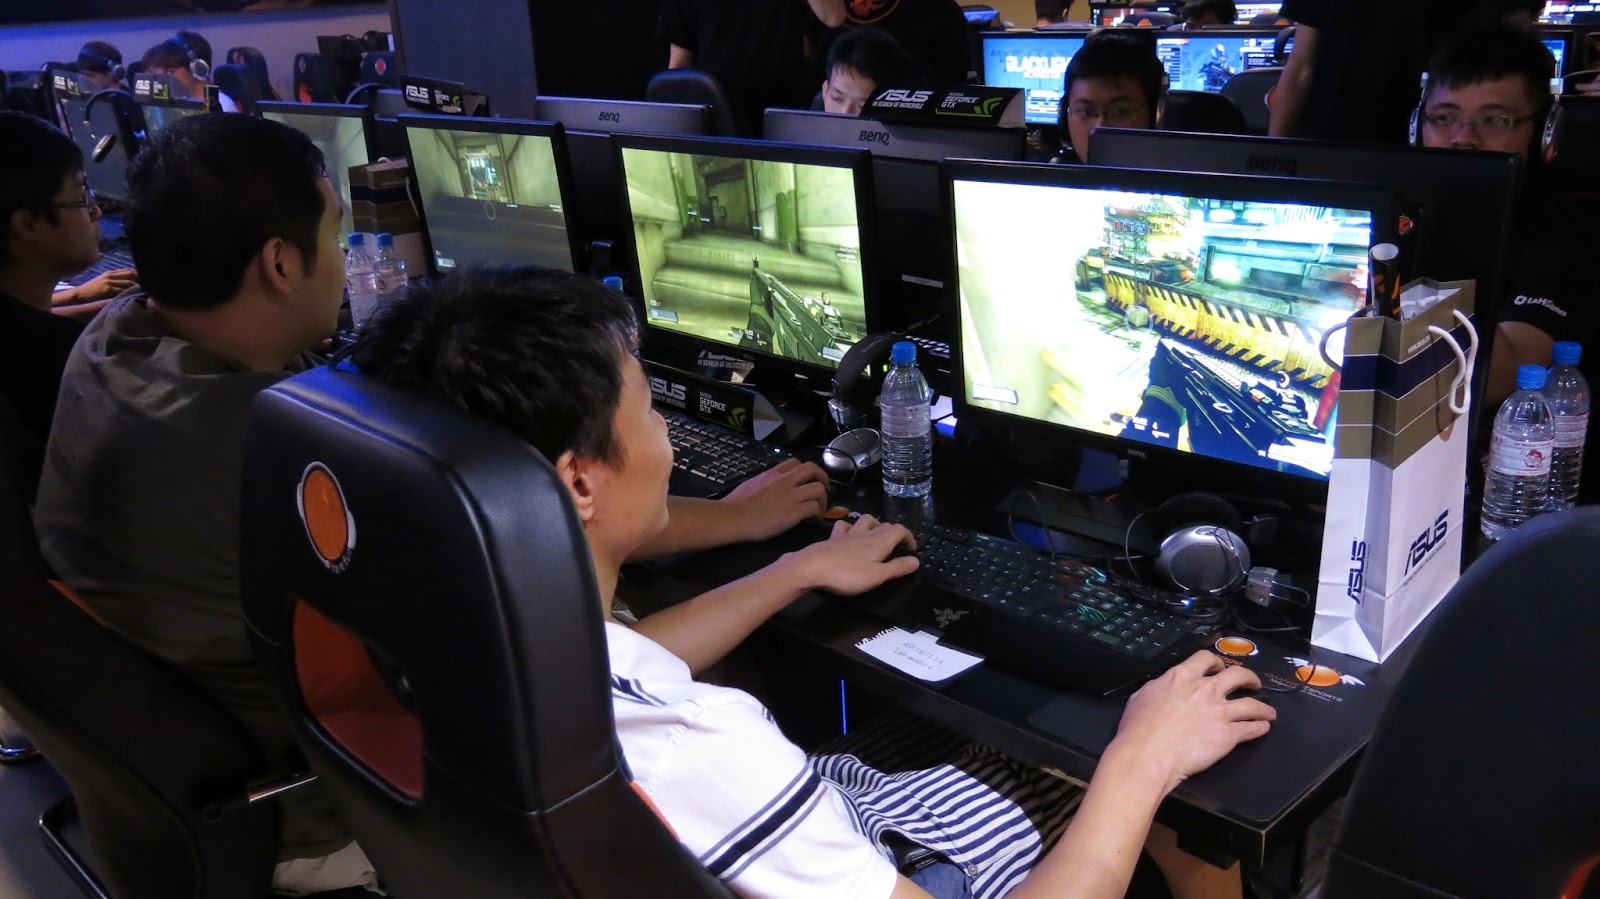 The Second ASUS & NVIDIA Gamers’ Gathering Demonstrates Cutting-Edge Technology Designed for Both Gamers and Tech Enthusiasts 42